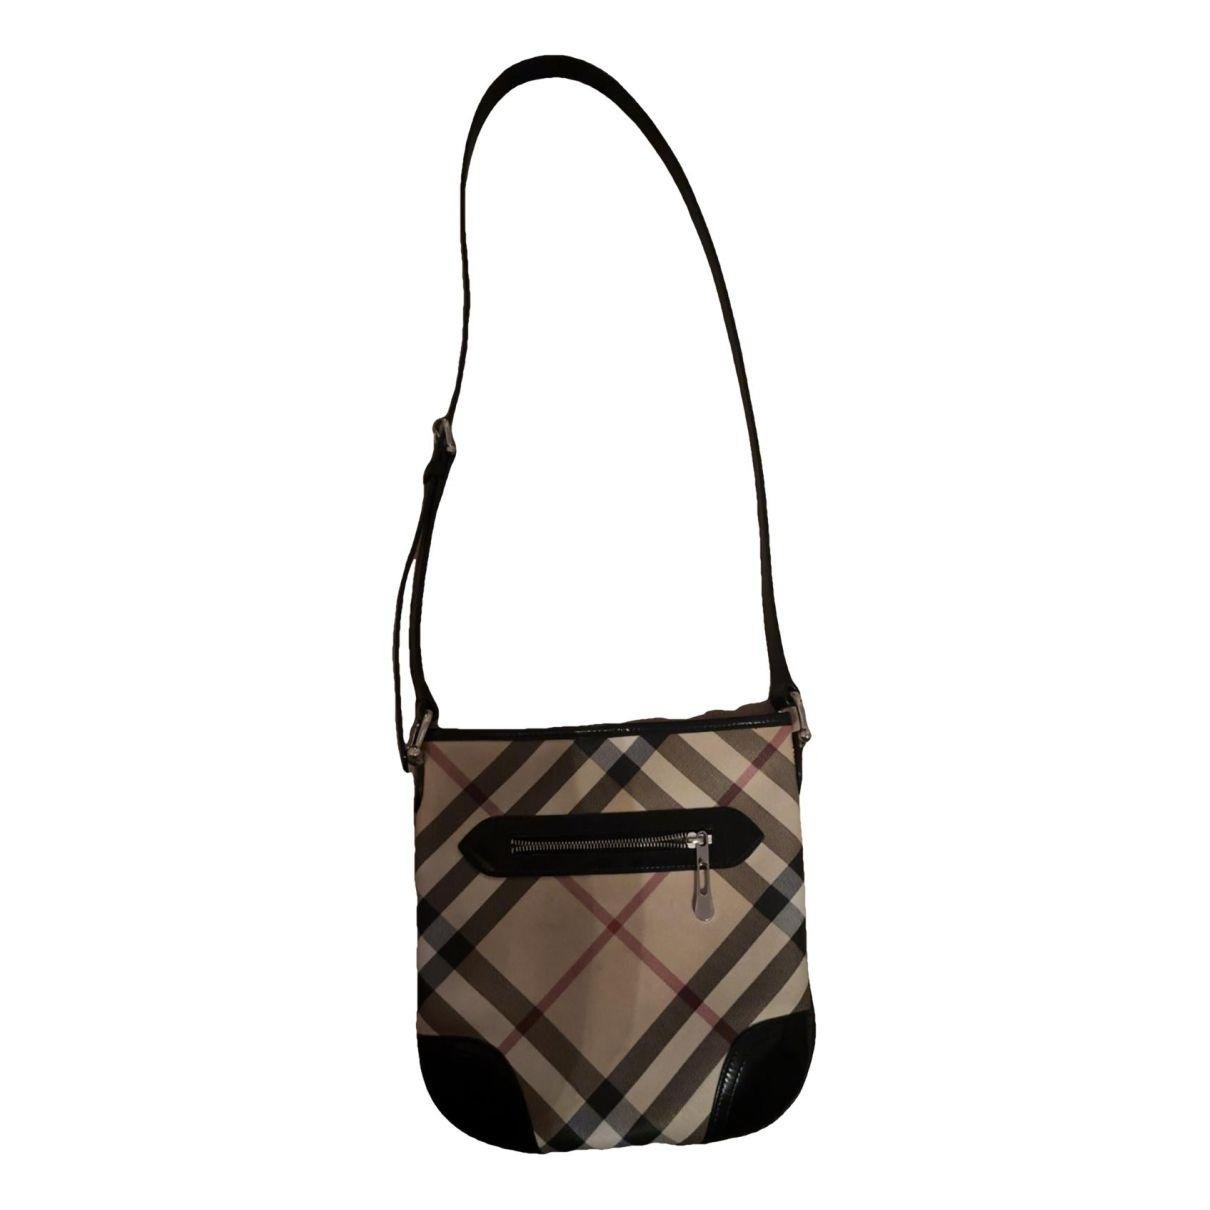 Dryden leather crossbody bag by BURBERRY